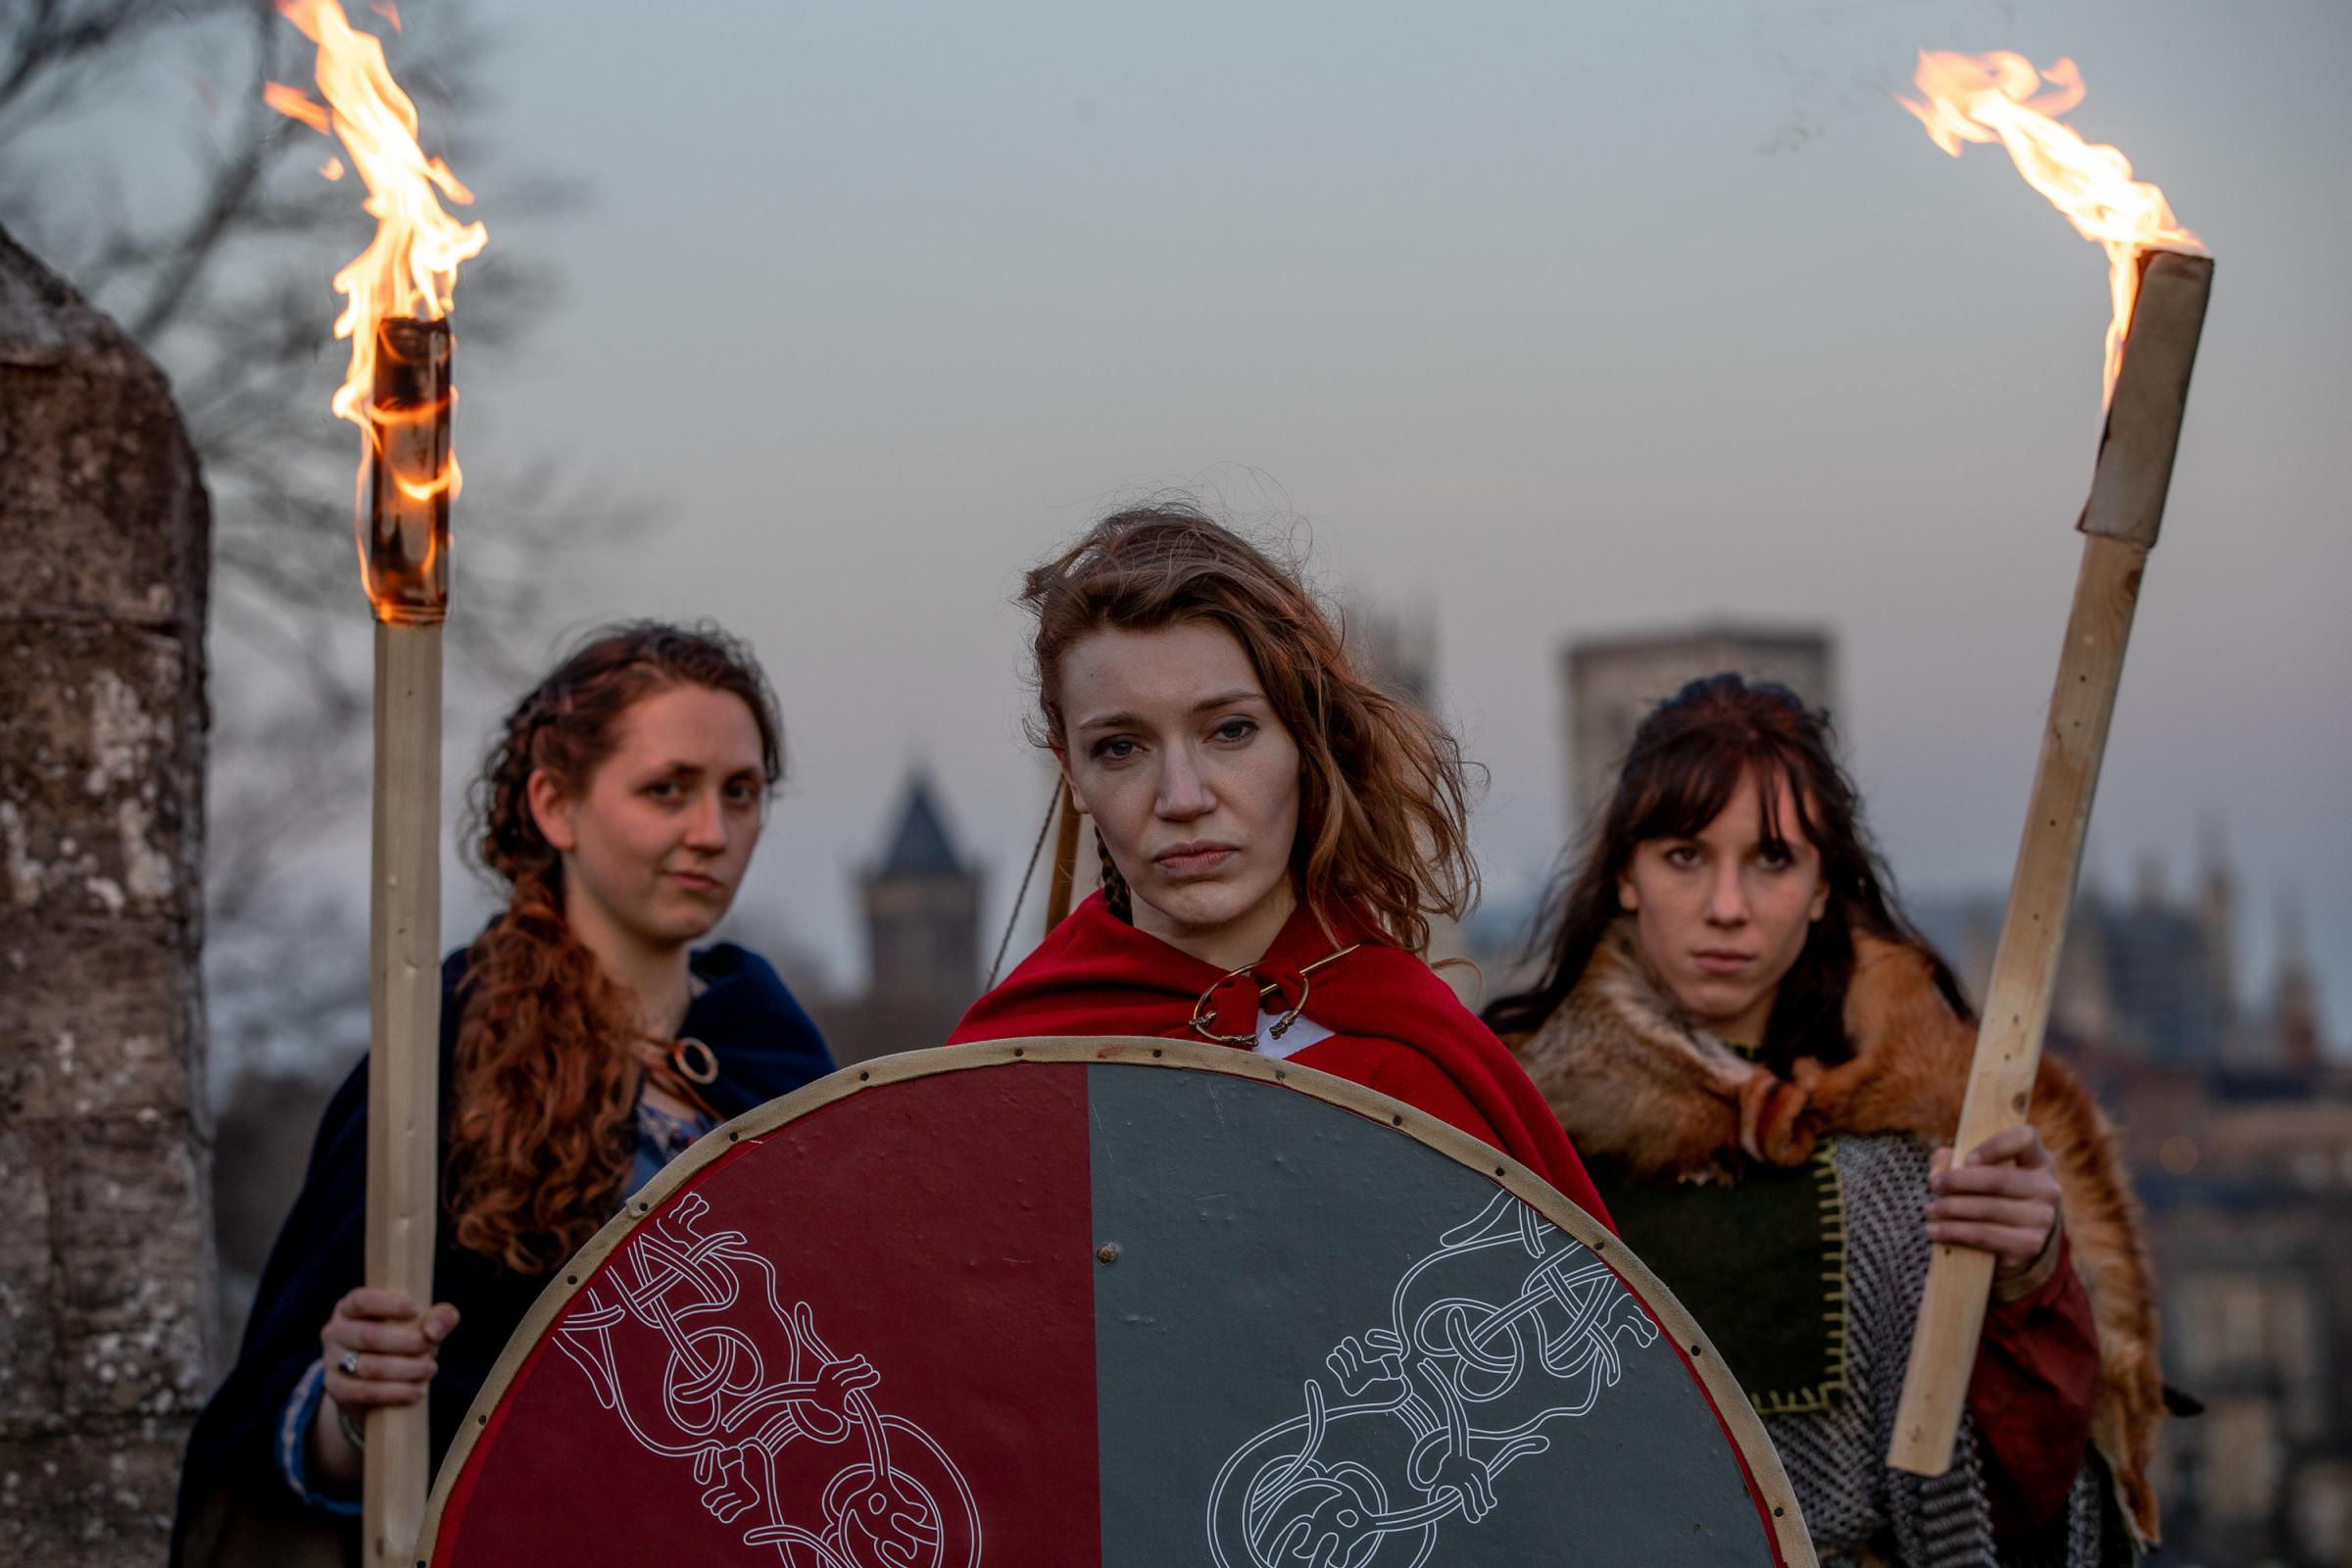 York Viking Festival: Warrior women in the spotlight as event prepares to launch on Wednesday